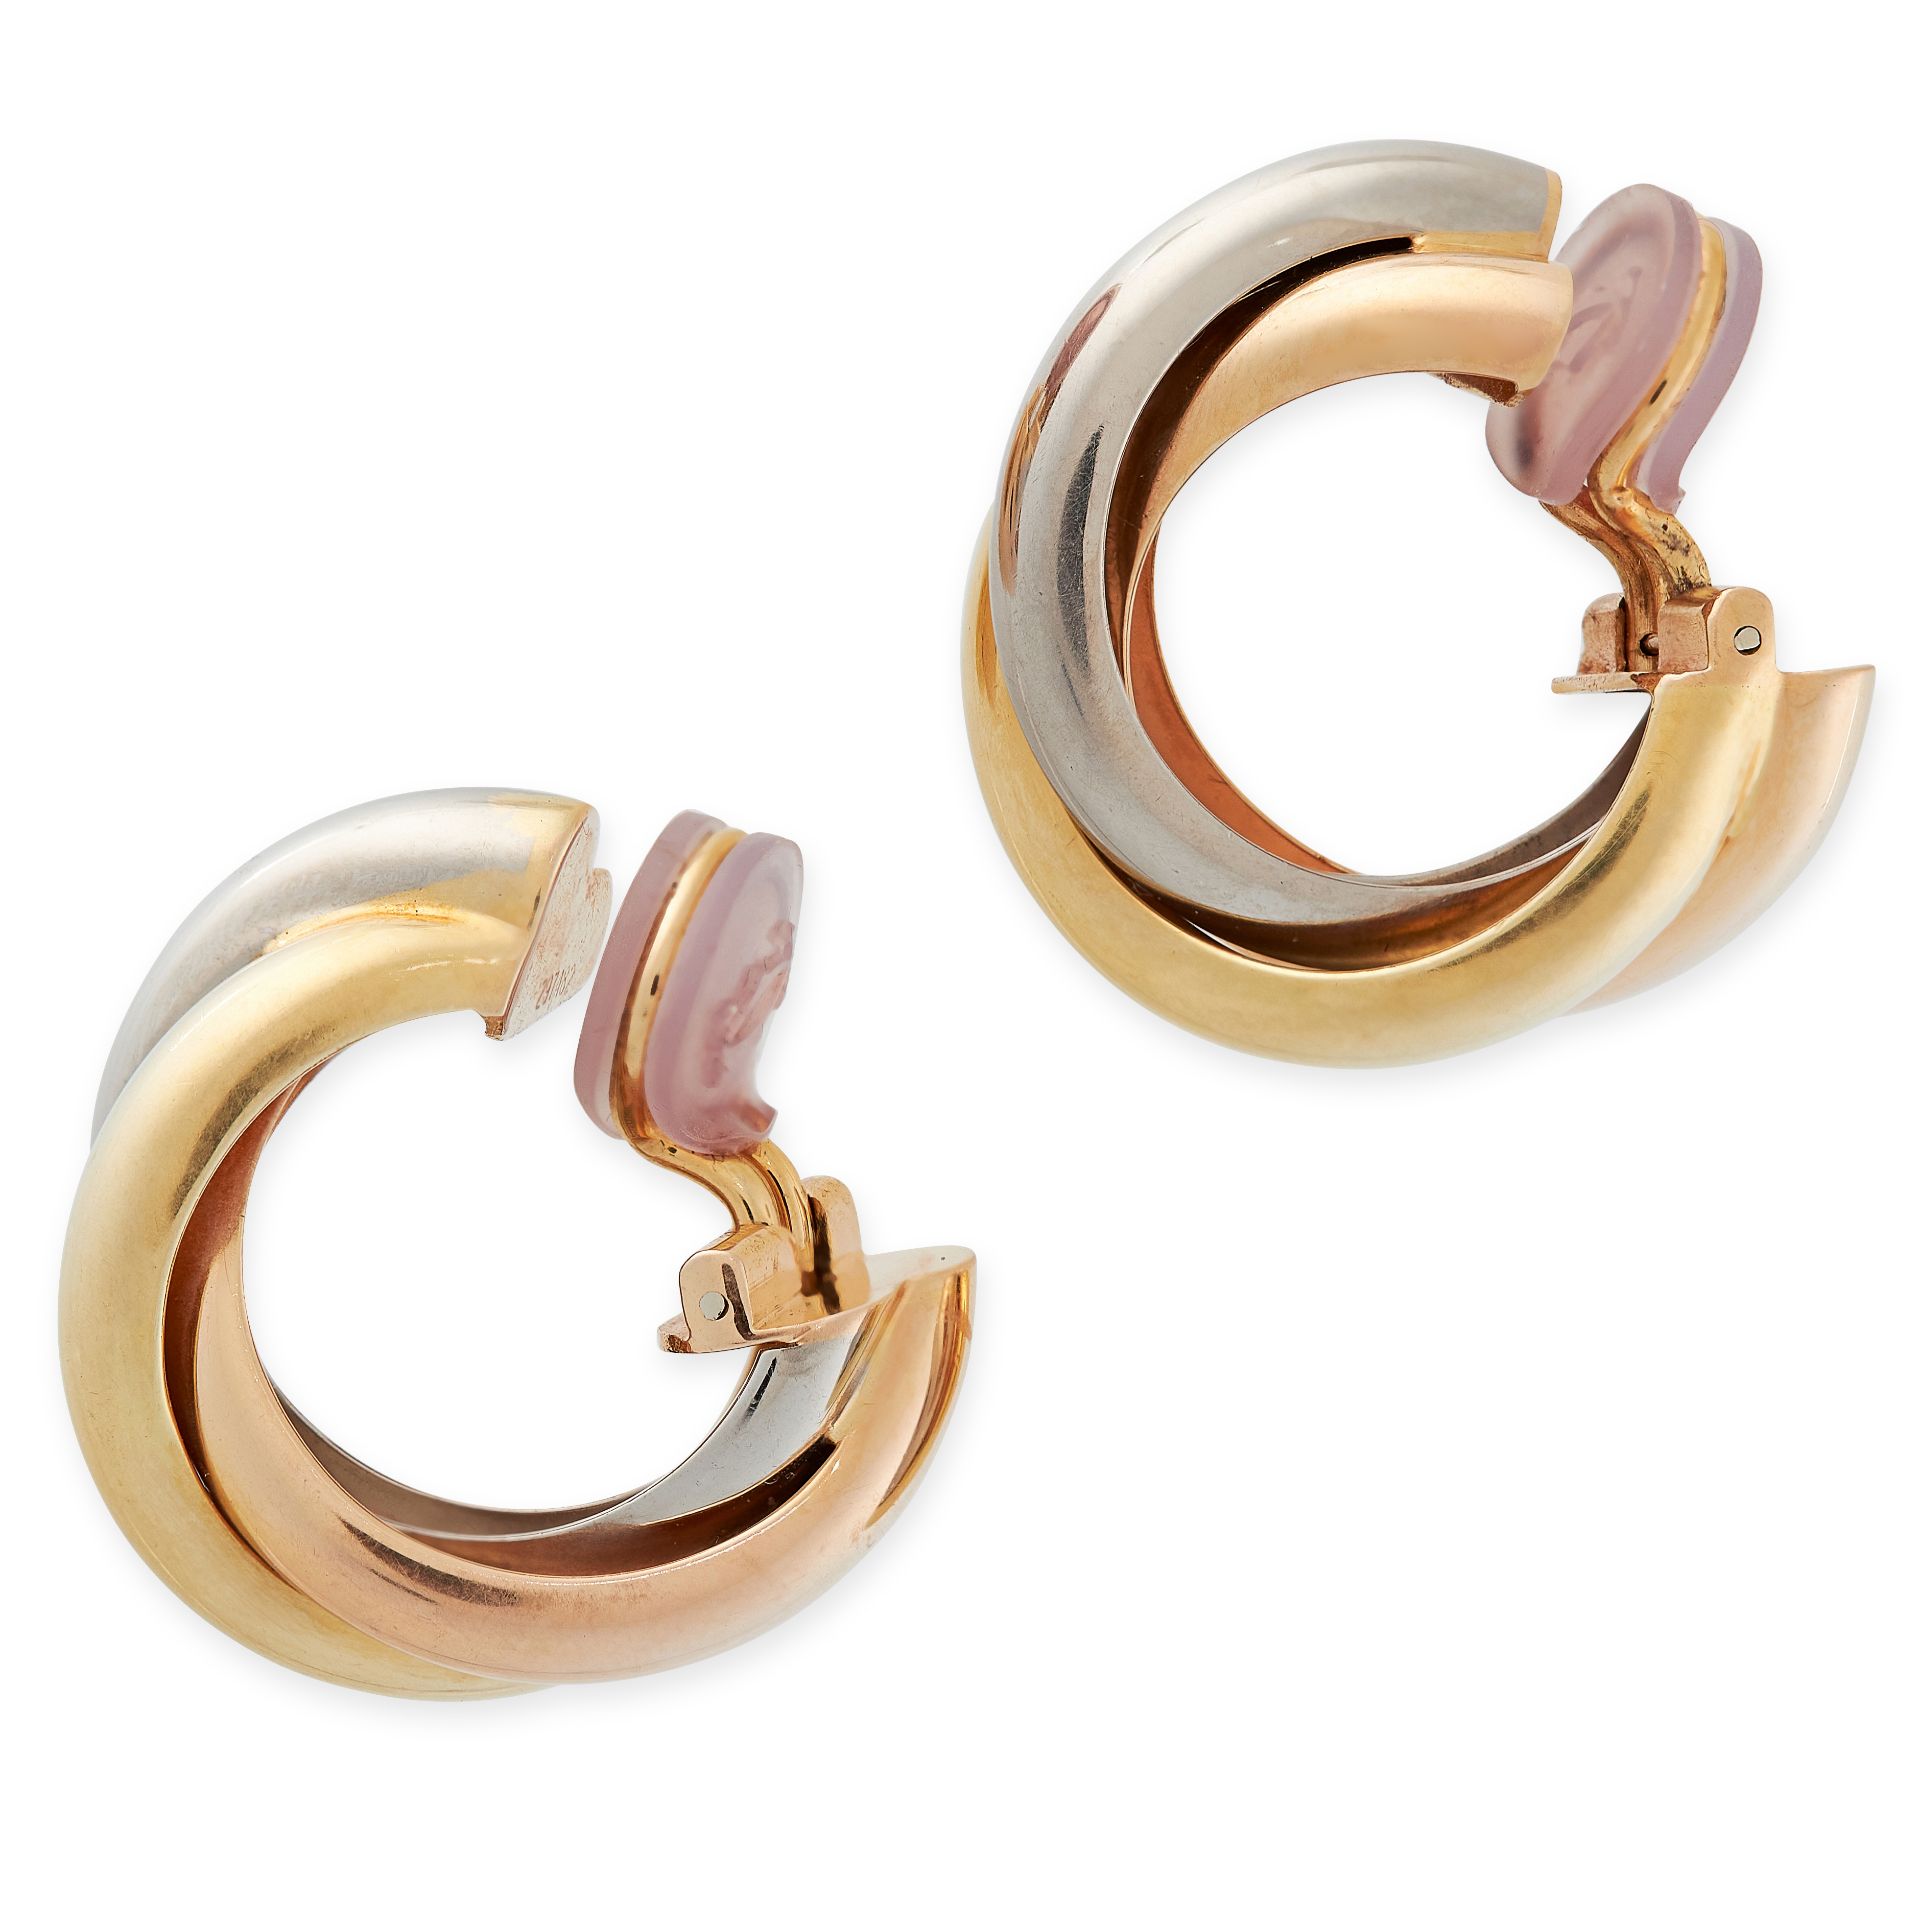 A PAIR OF TRINITY DE CARITER HOOP CLIP EARRINGS, CARTIER in 18ct gold, each designed as a trio of - Image 2 of 2